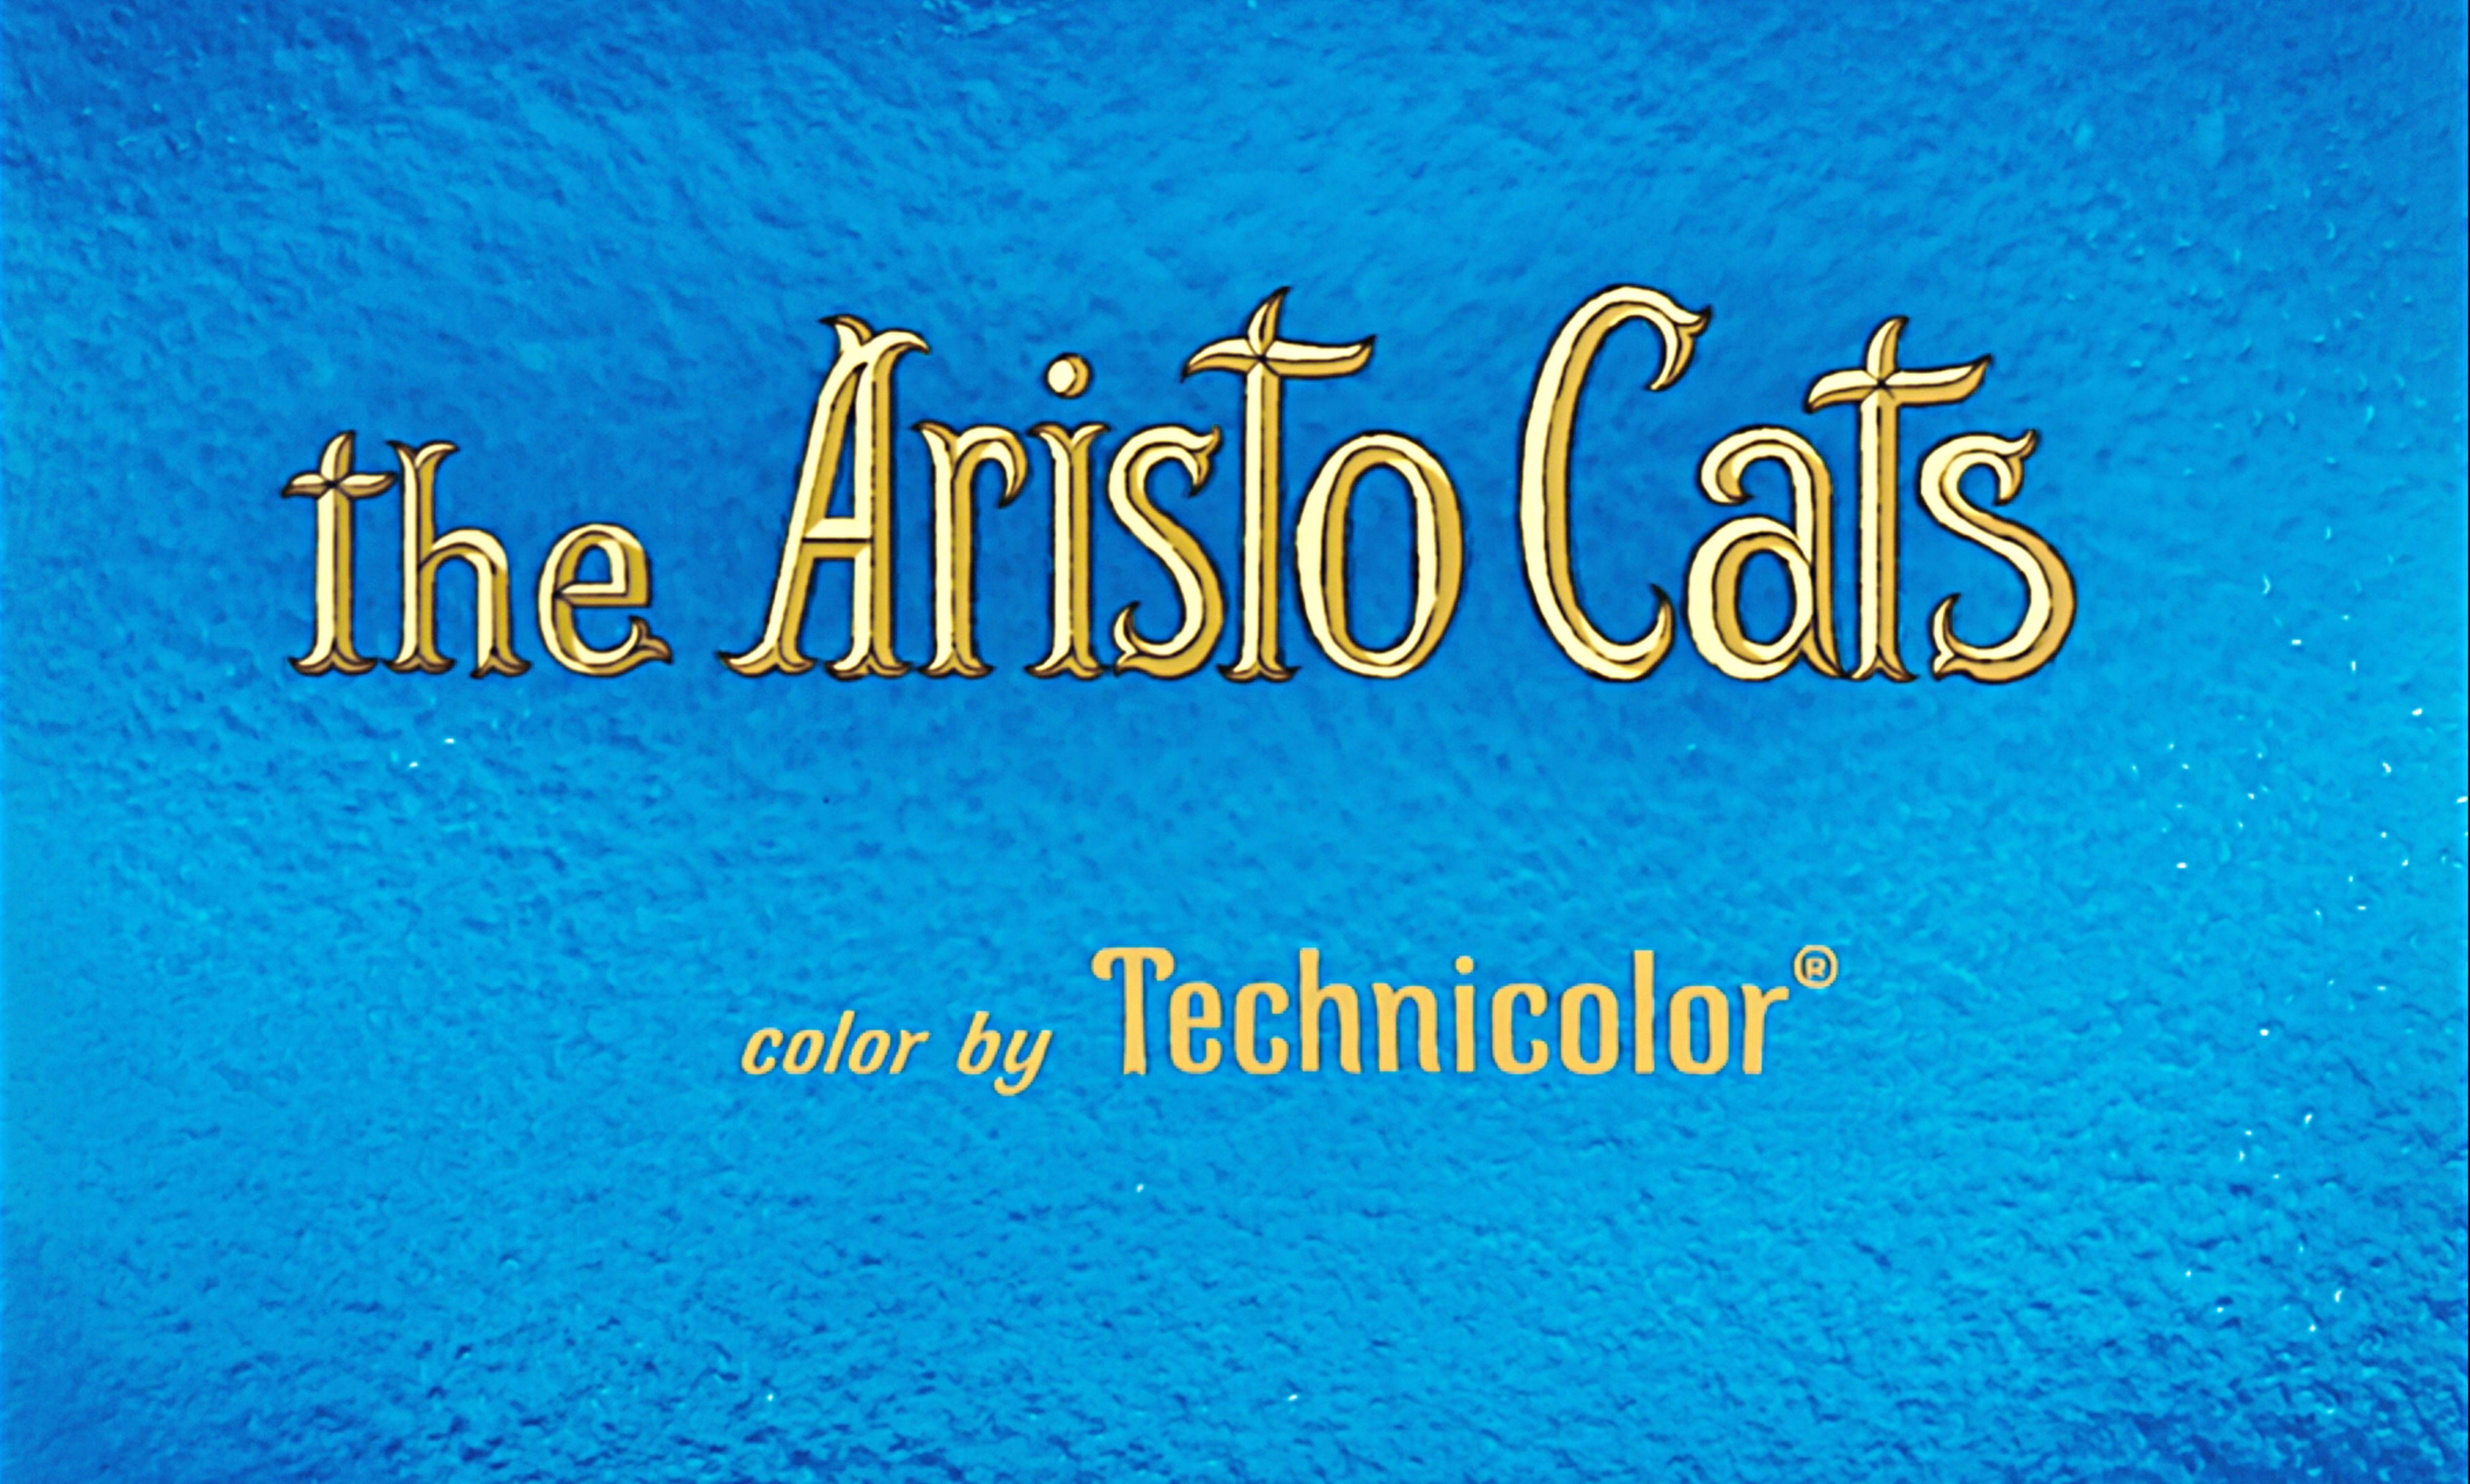 The Aristocats Title Logo - Pin by Eric Kassel on Lettering & Type | Disney movies, Aristocats ...